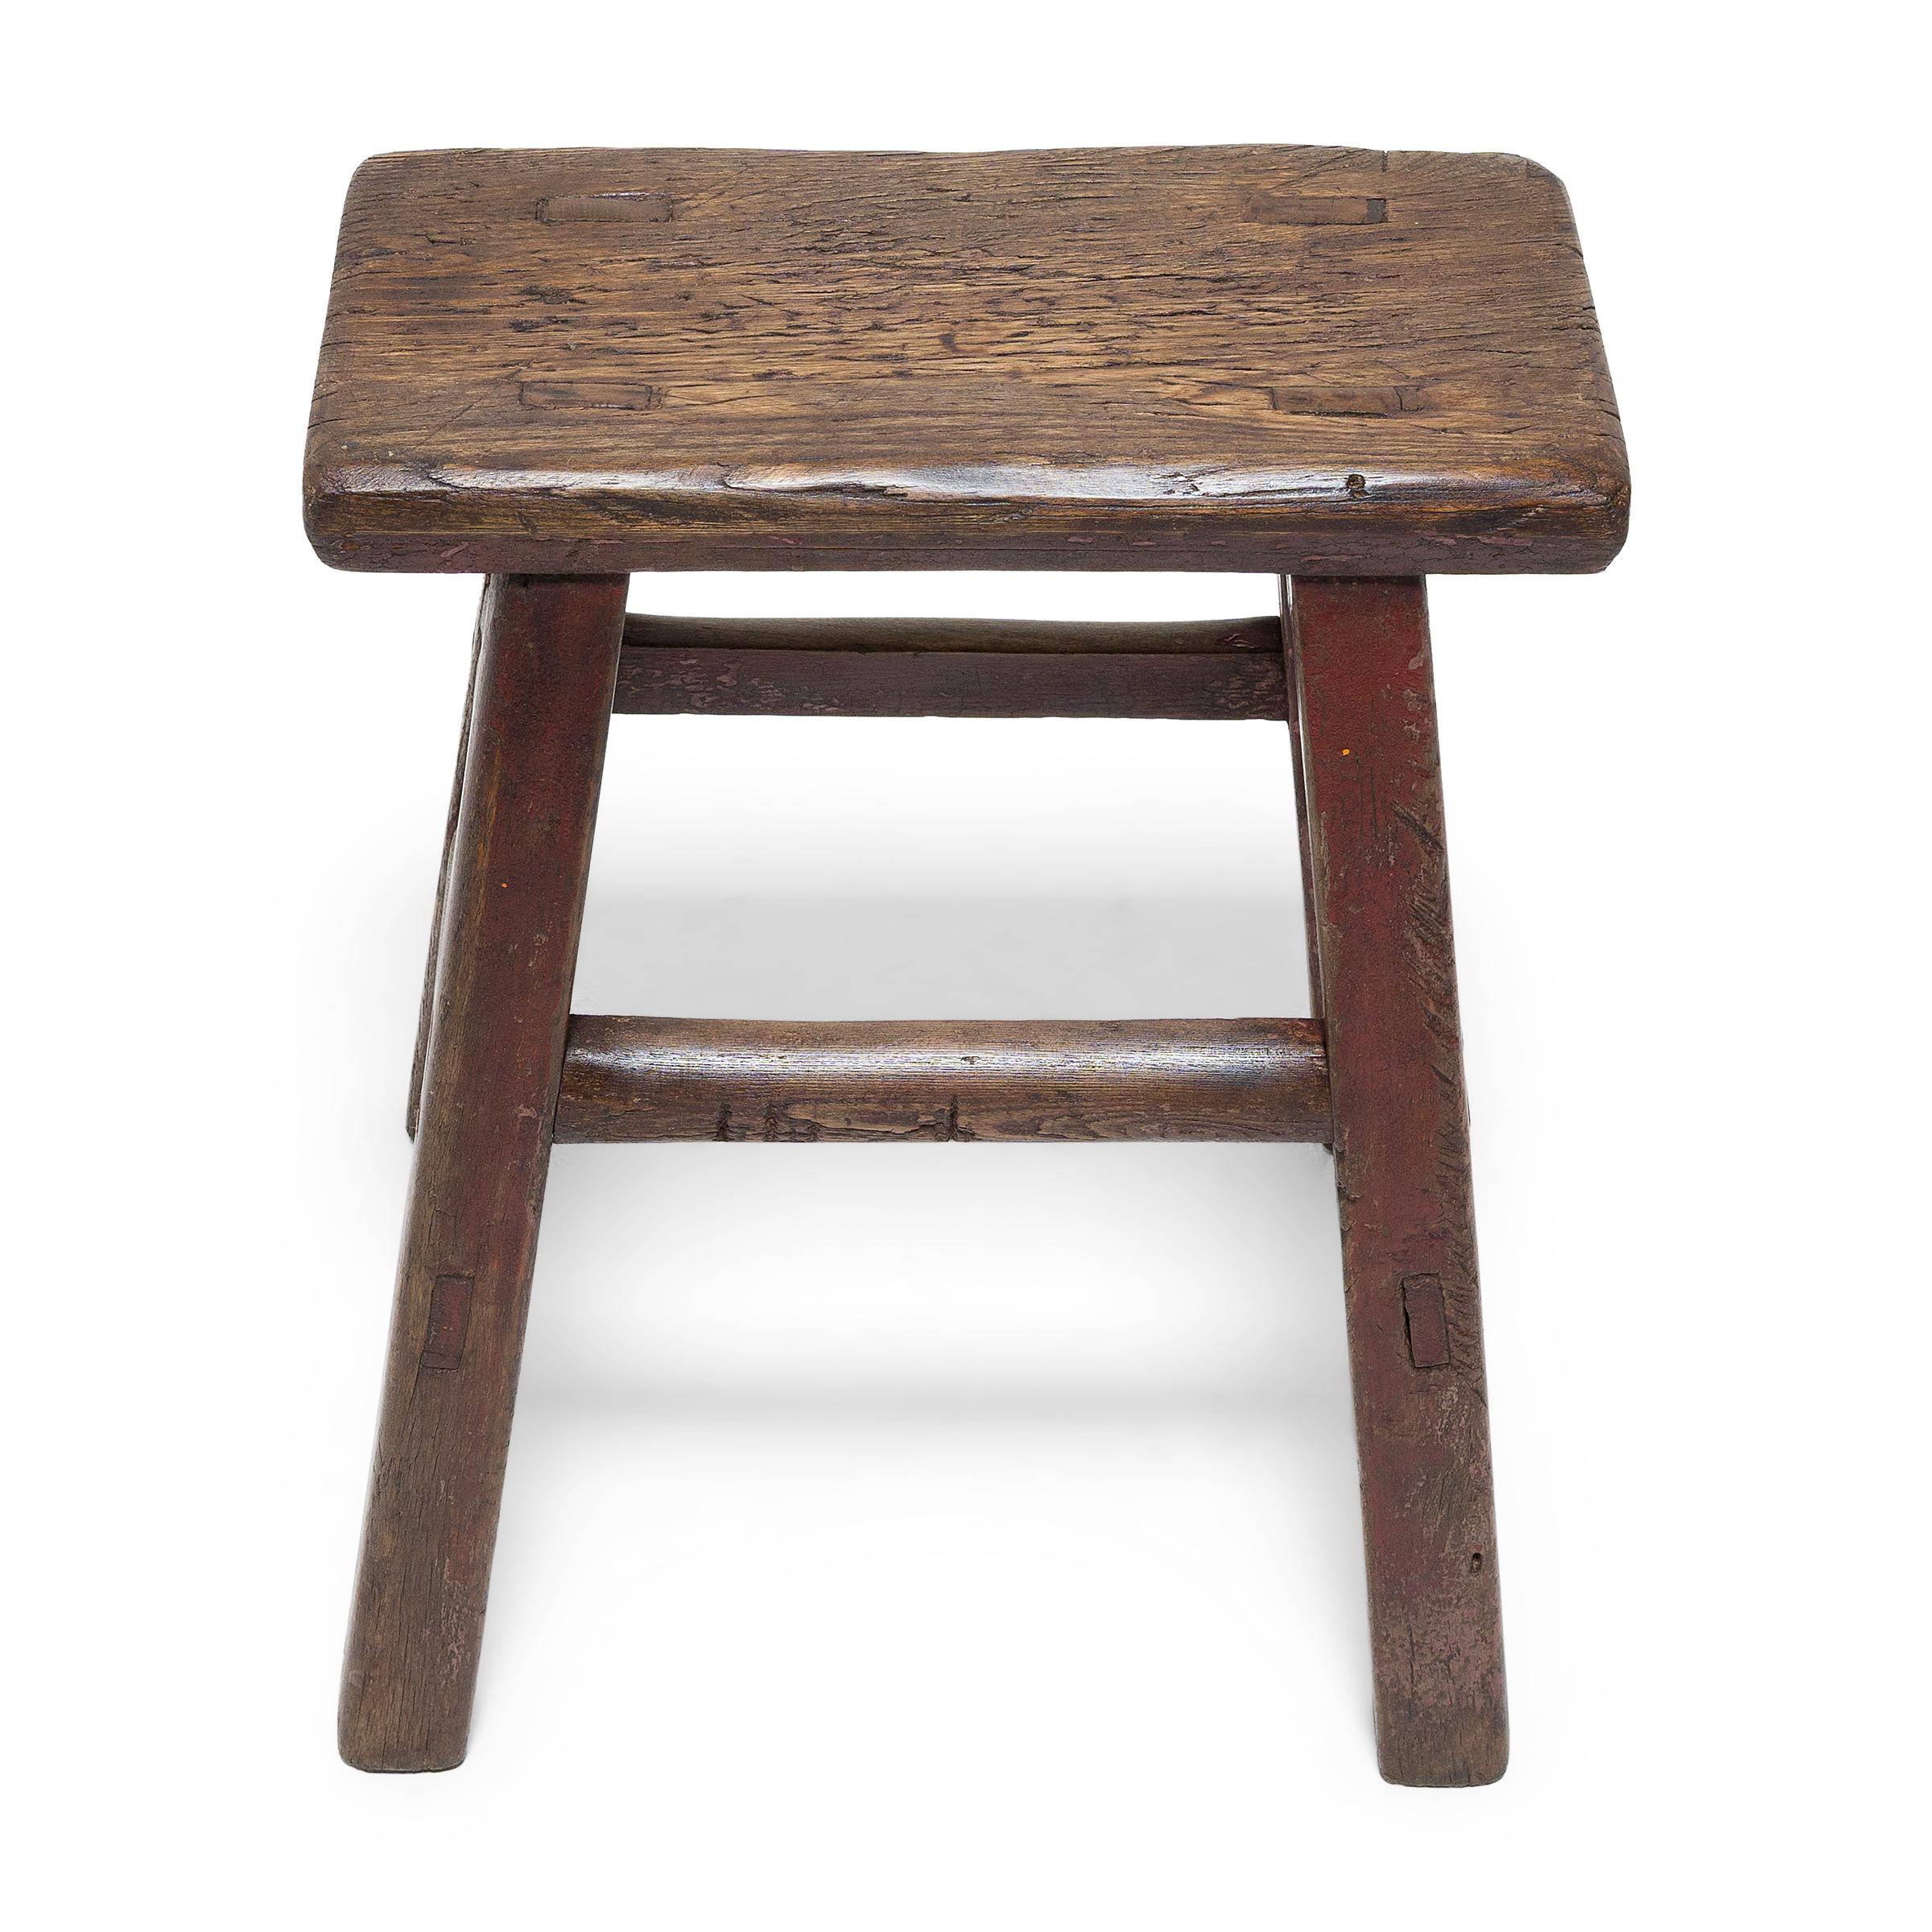 Painted Provincial Chinese Splayed Leg Stool, circa 1900 For Sale